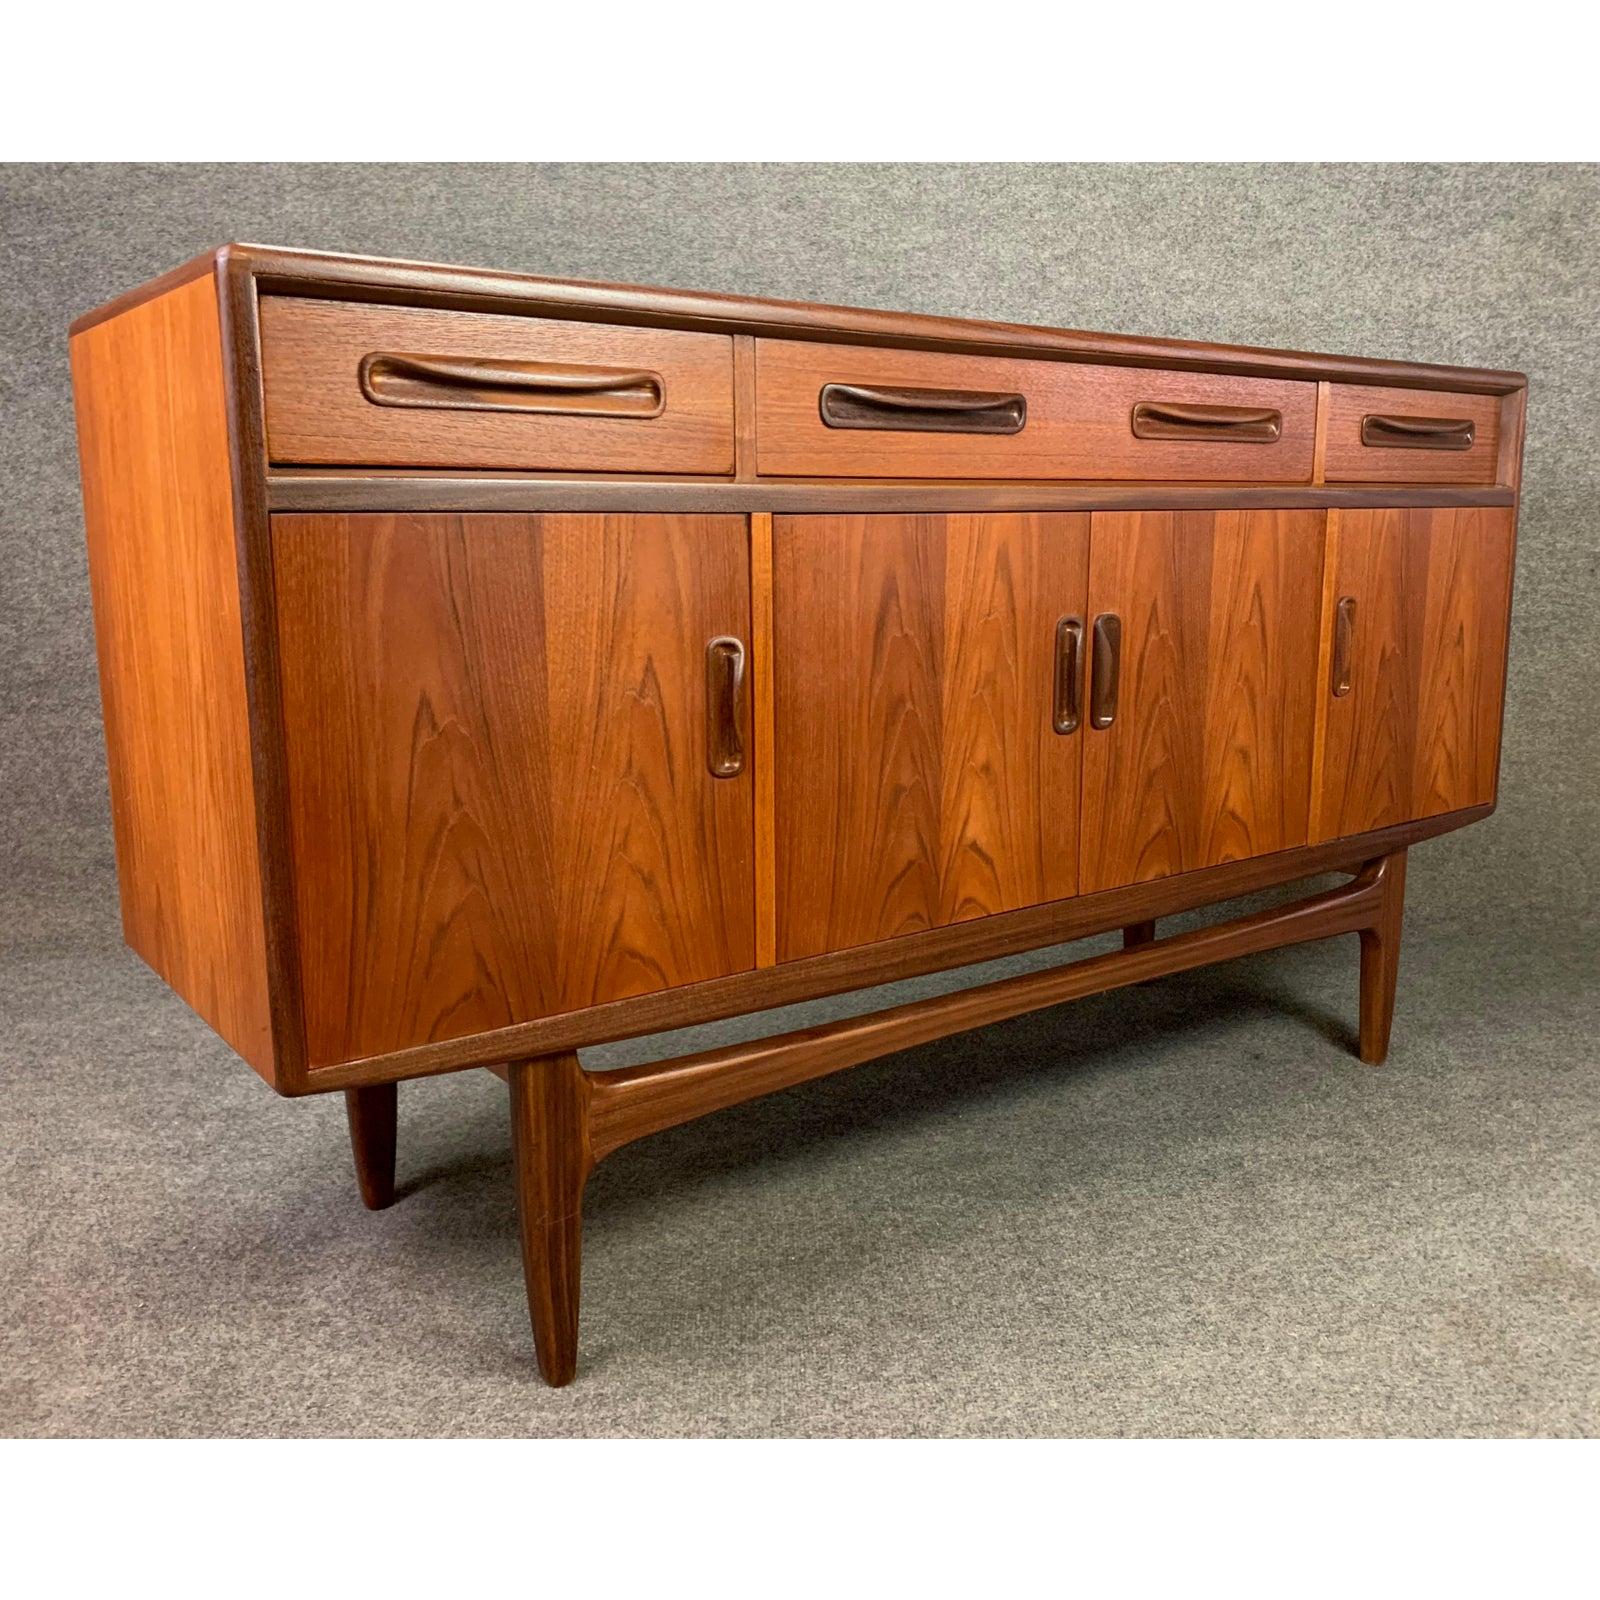 Here is a beautiful british Mid-Century Modern short sideboard in teak wood designed by Victor Wilkins part of the acclaimed 